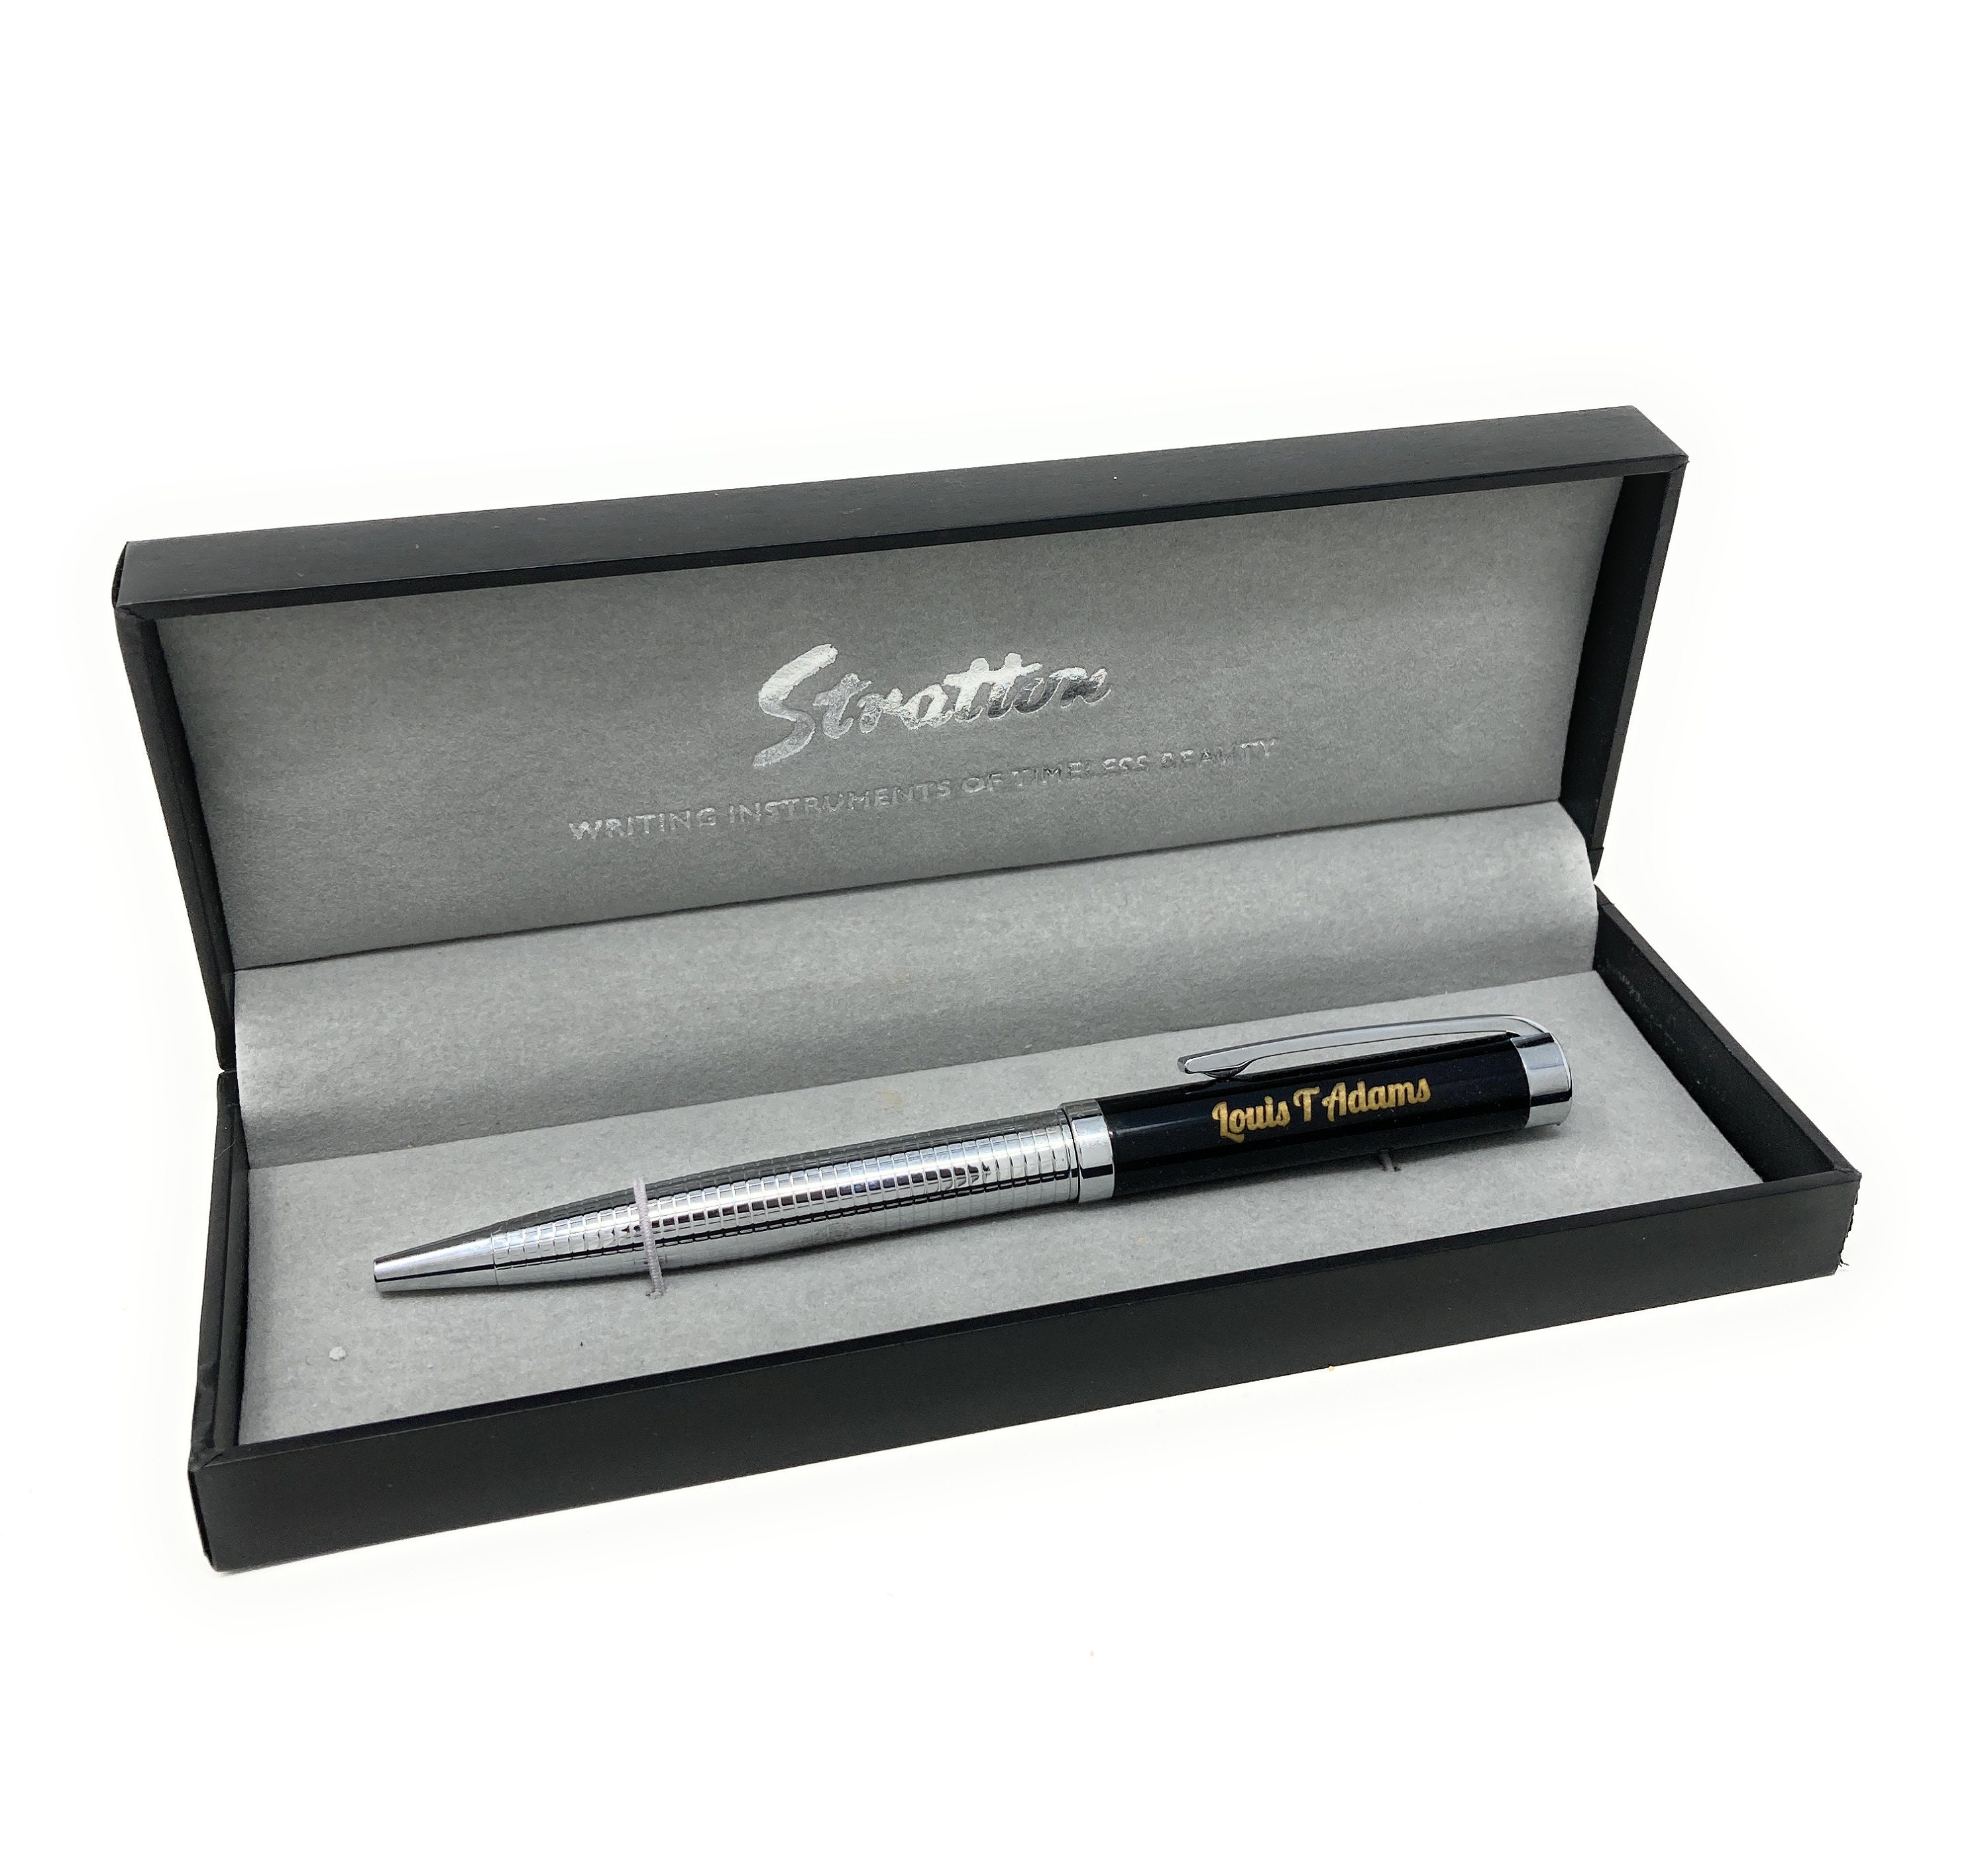 Stratton Roller Ball & Biro Pen Set Silver and Gold Plated Boxed Gift 